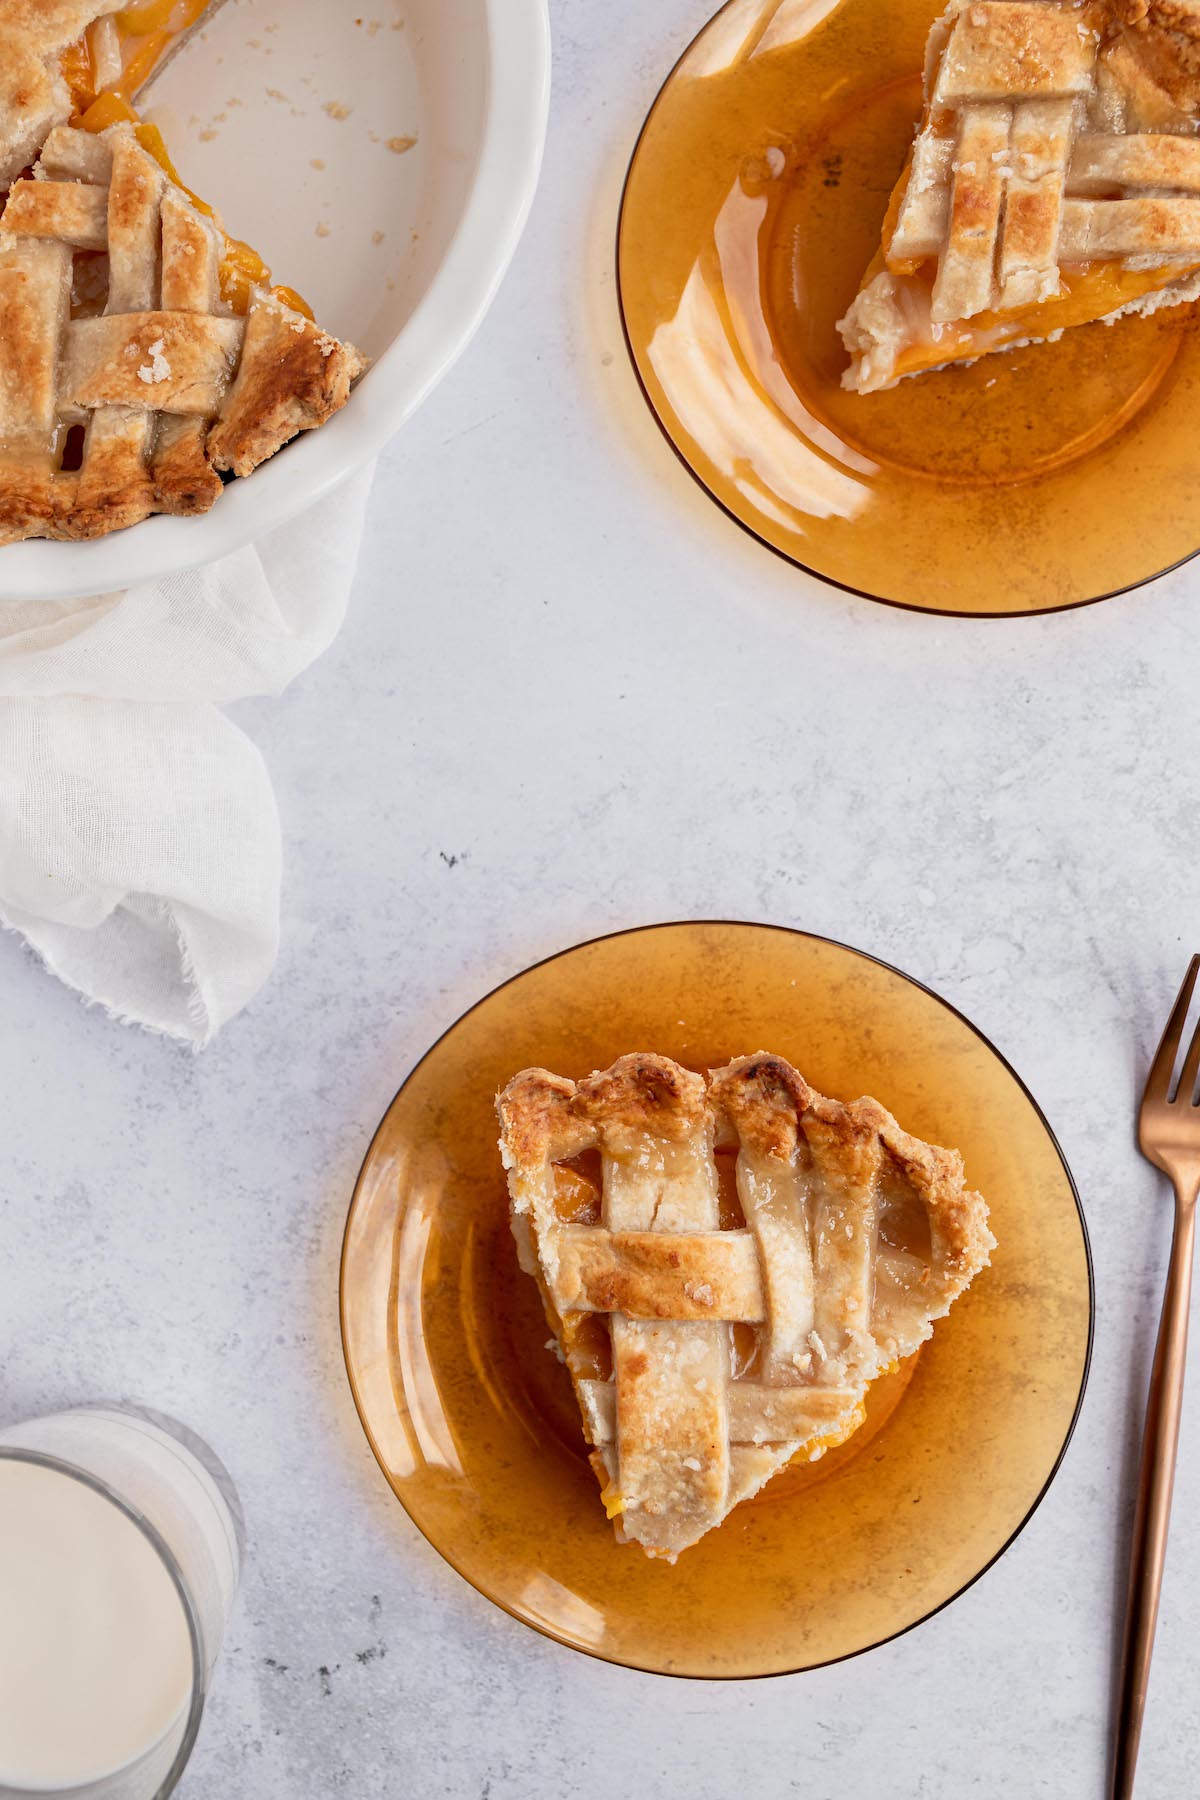 **Delectable Delights: Crafting the Ultimate Frozen Peach Pie Recipe**